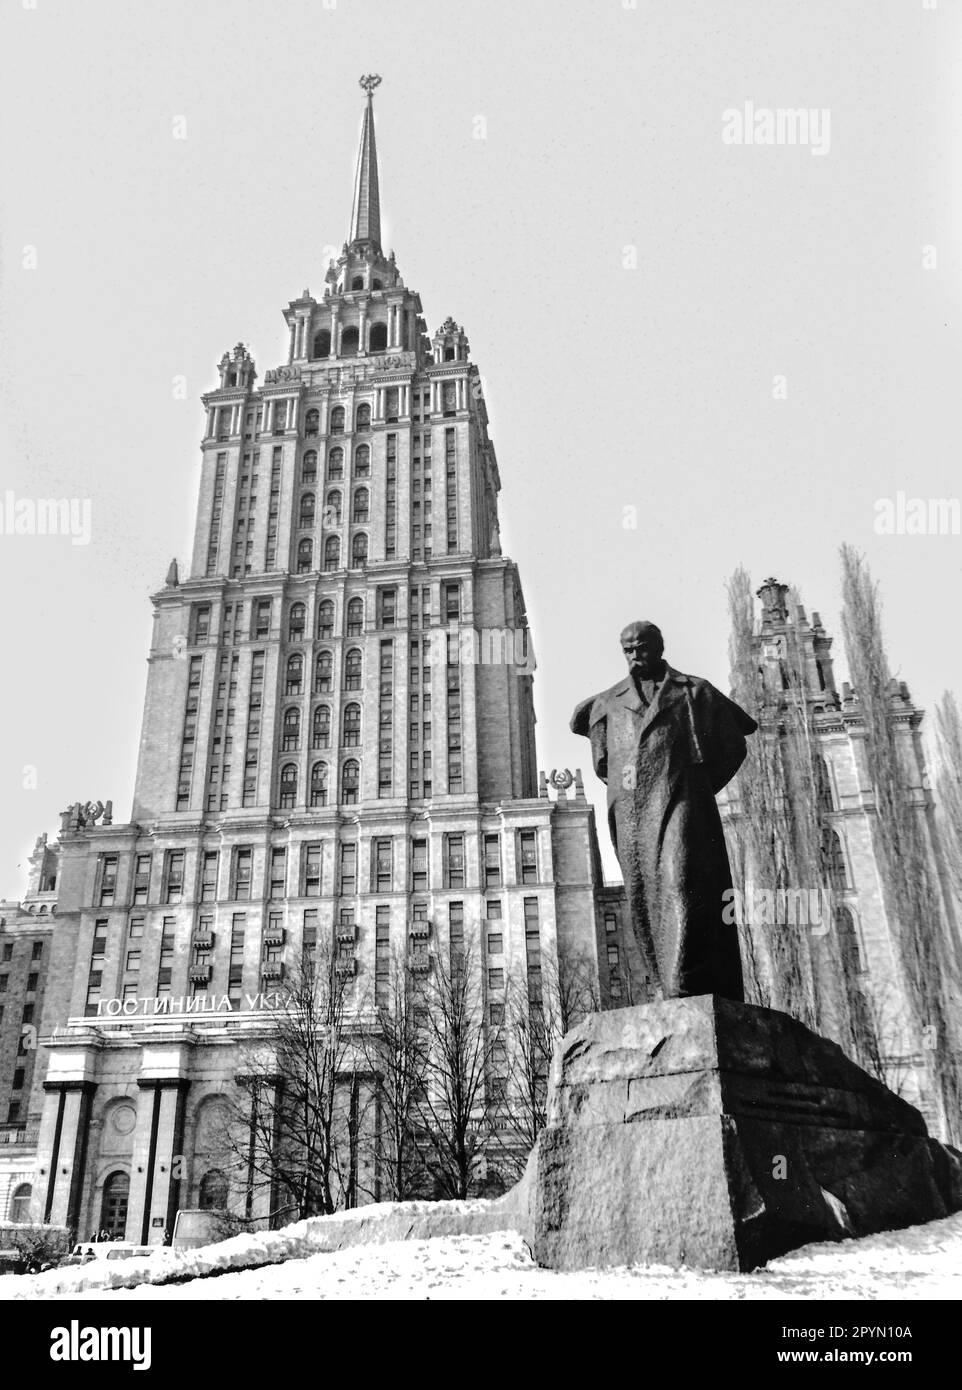 1988: A statue of Ukrainian poet Taras Shevchenko stands in front of the Hotel Ukraina. The Baroque 'wedding cake' style building is one of the so-called 'Seven Sisters' commissioned by Joseph Stalin as part of a plan to modernize Moscow immediately following World War II. Construction began in 1953 and the Hotel Ukraina opened in 1957. Stock Photo